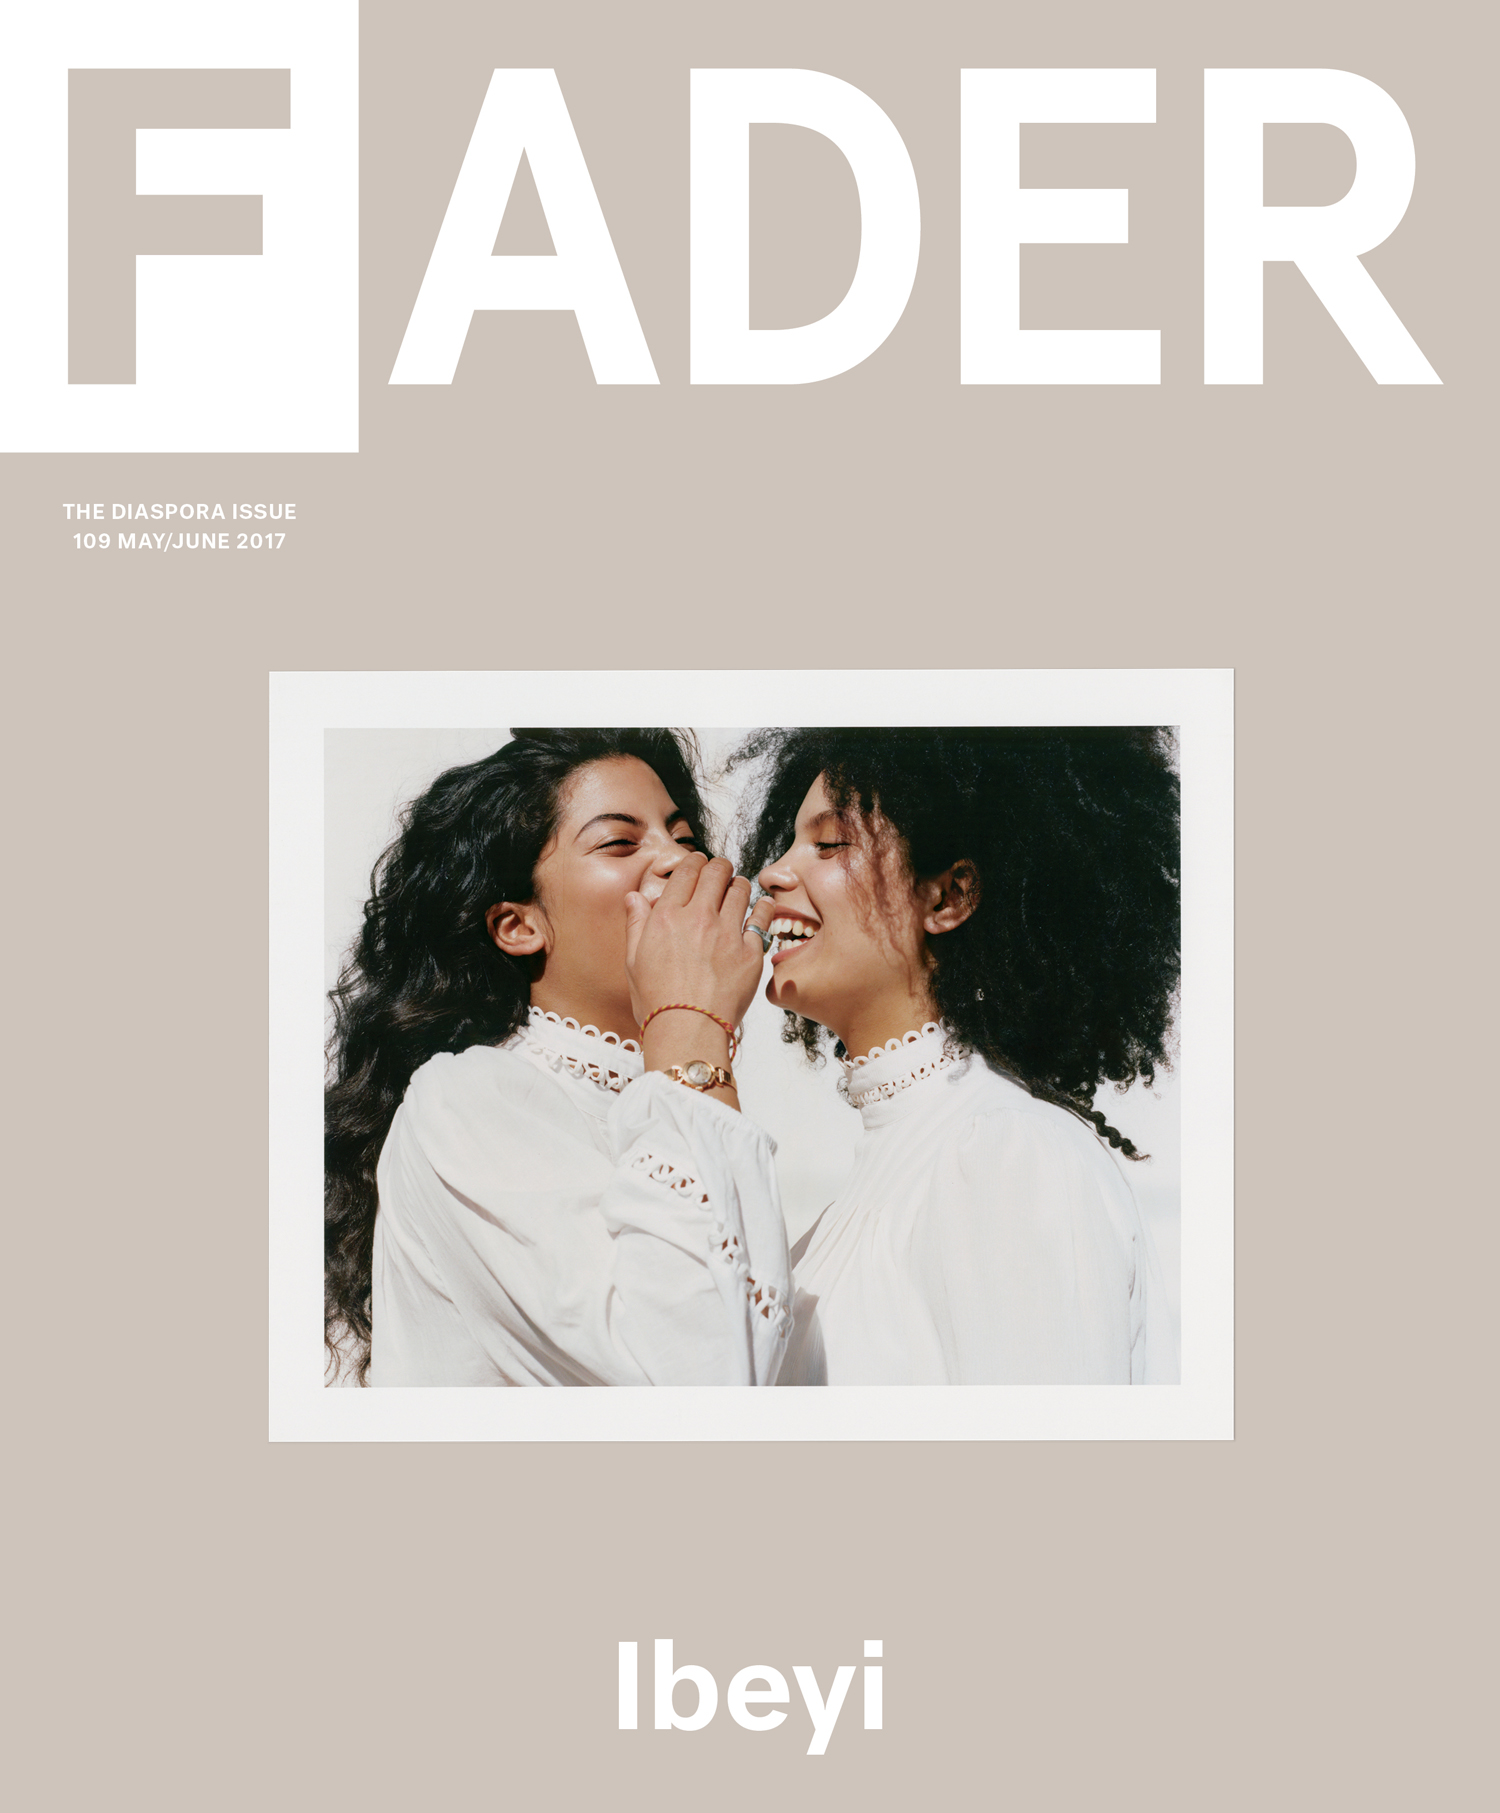 The FADER Issue 109